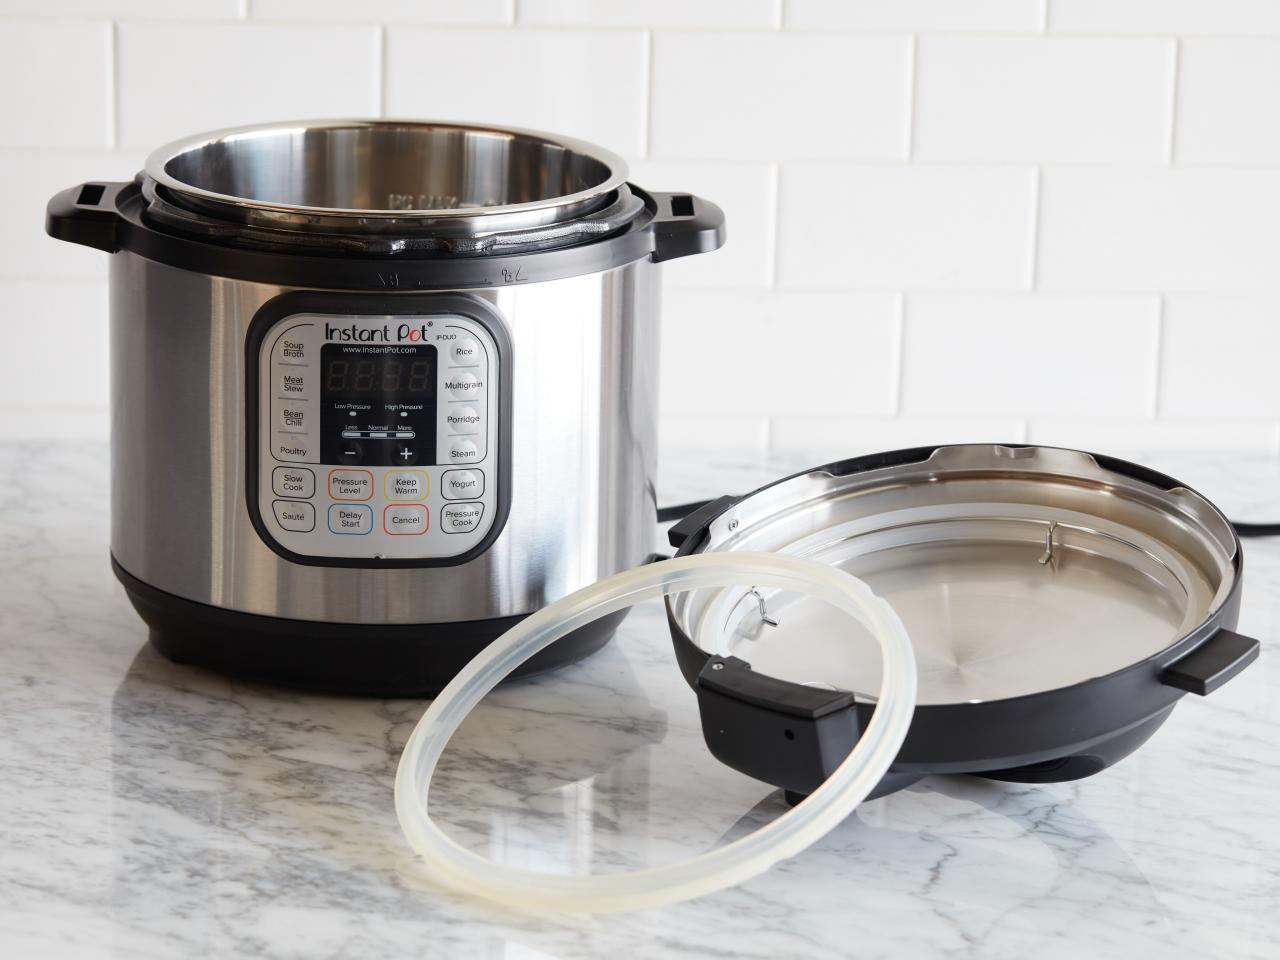 What Is An Instant Pot? - 13 Things to Know Before Buying An